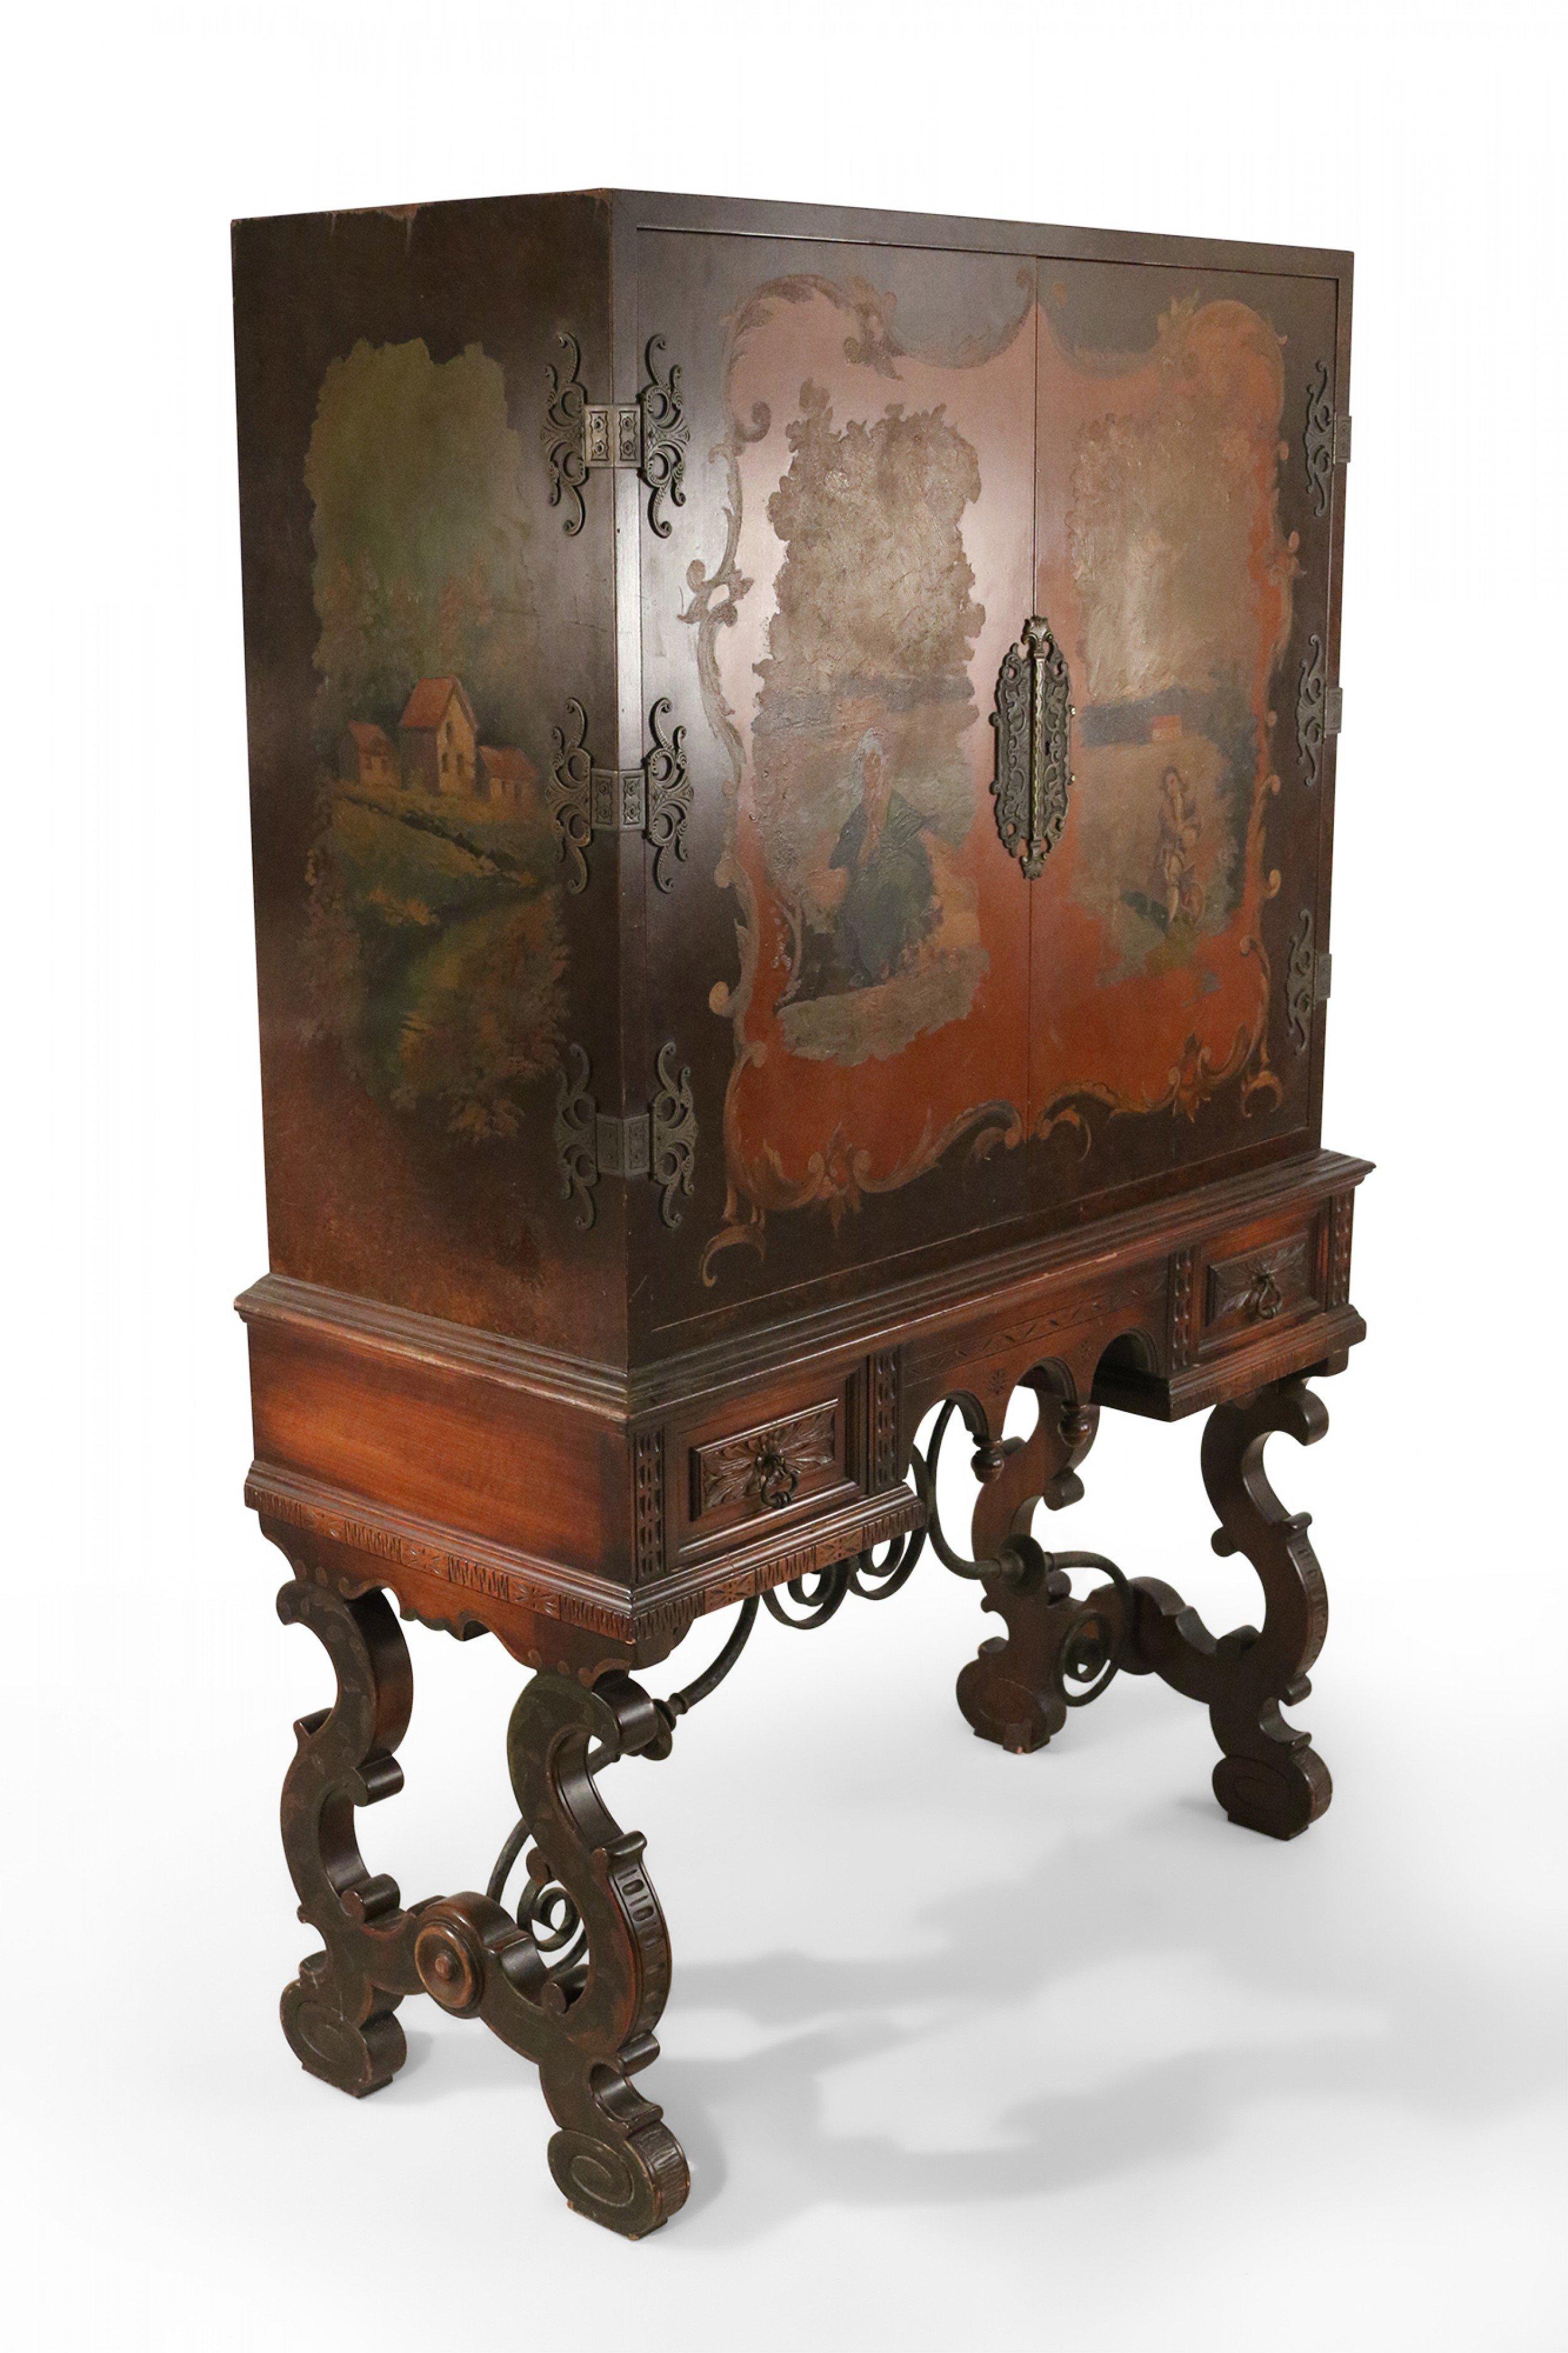 English Renaissance style (19th-20th century) highboy cabinet with a painted pastoral scene on the front 2 doors and sides with two harp-shaped legs with a wrought iron stretcher and iron hardware.